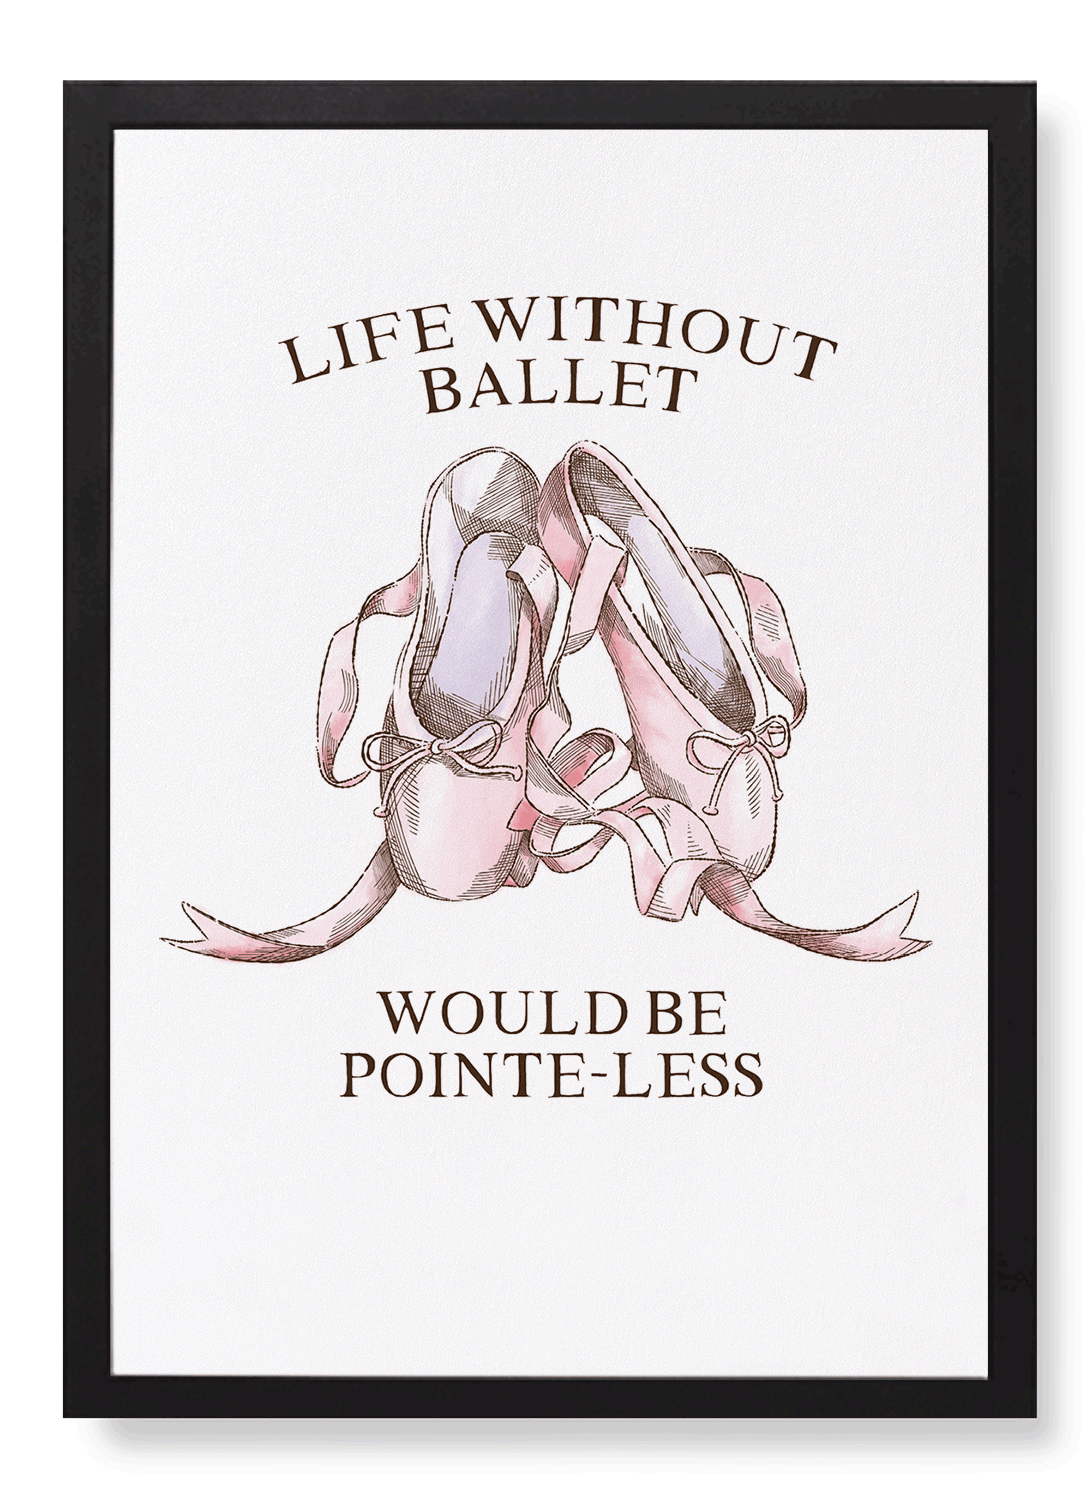 LIFE WITHOUT BALLET